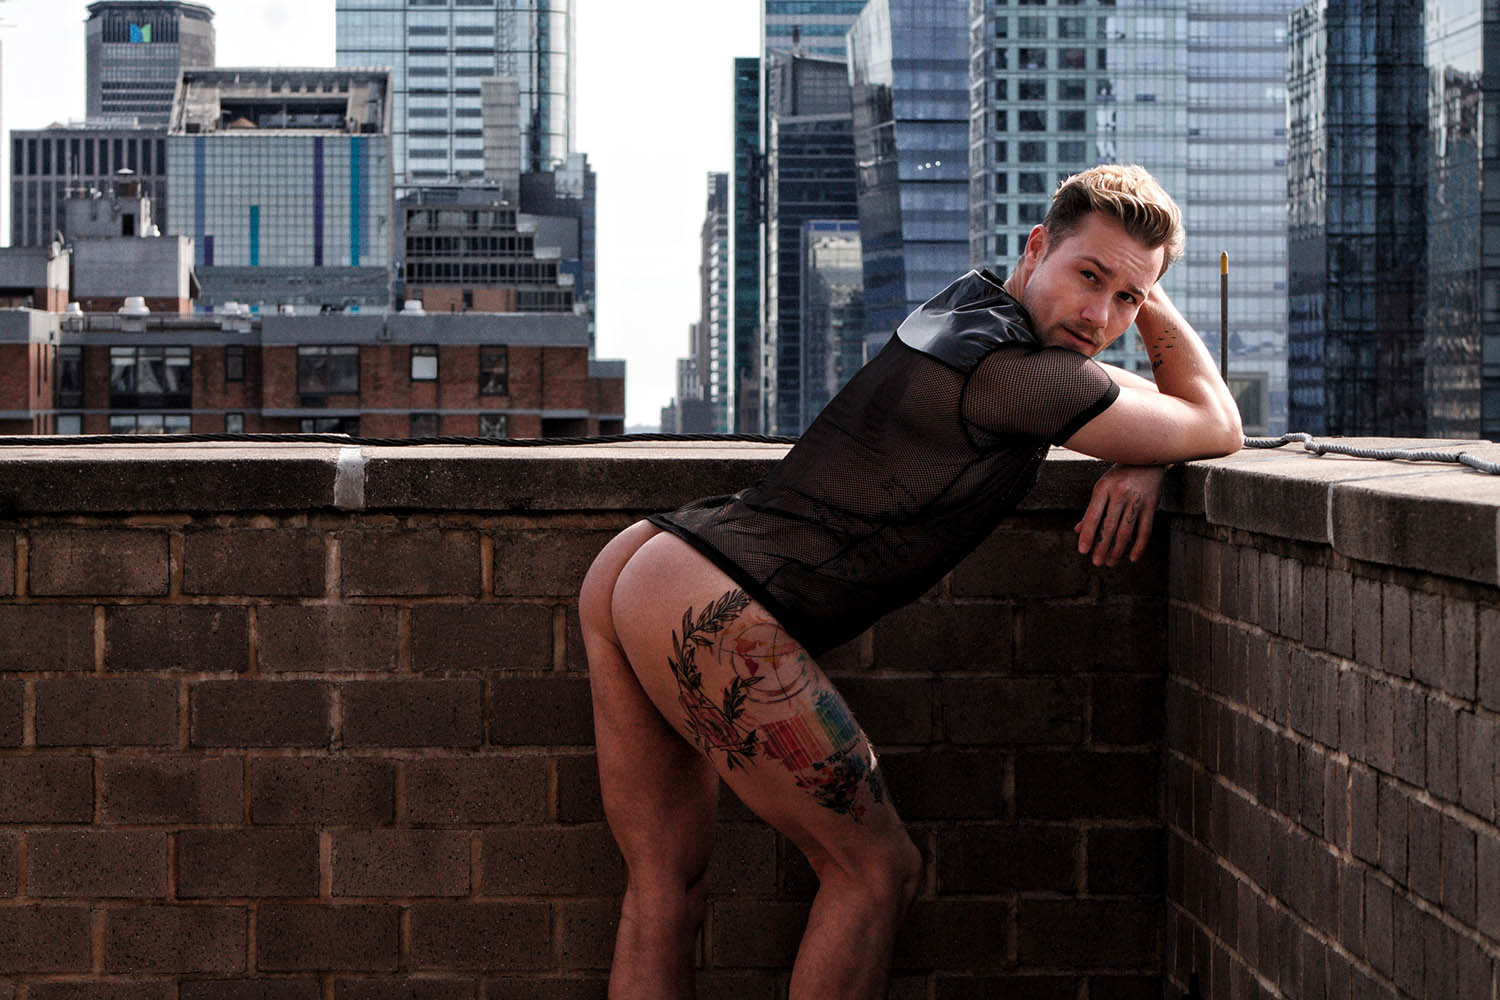 – EXCLUSIVE – NSFW – Kyle Michael Kuhlman by Sergey Sheptun, part 1.